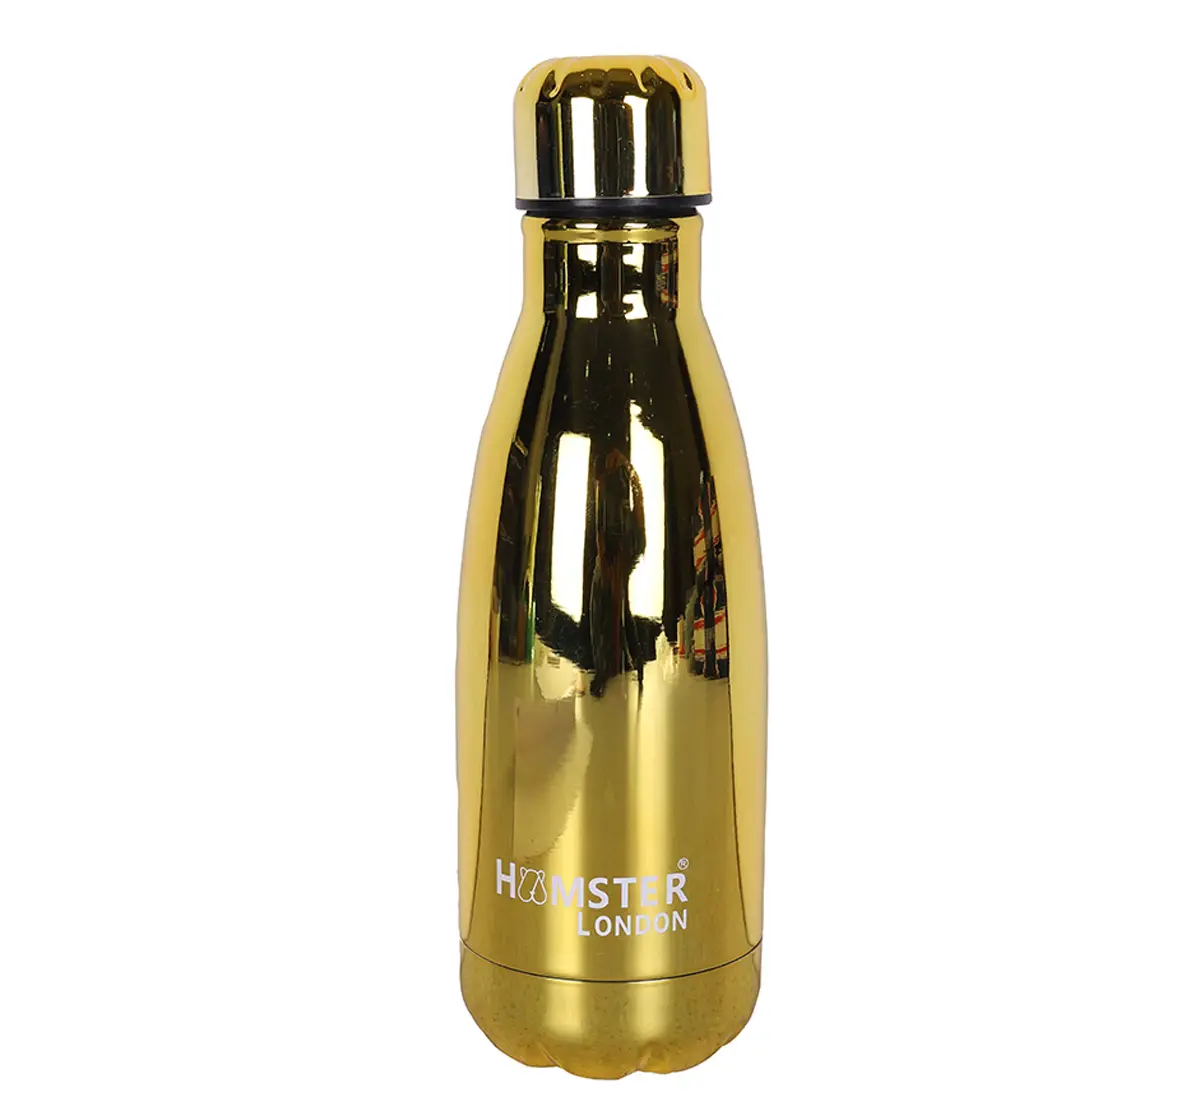 Stainless Steel Insulated Water Bottle by Hamster London for Kids, Gold, Non-Toxic, BPA Free, 350ml, 5Y+